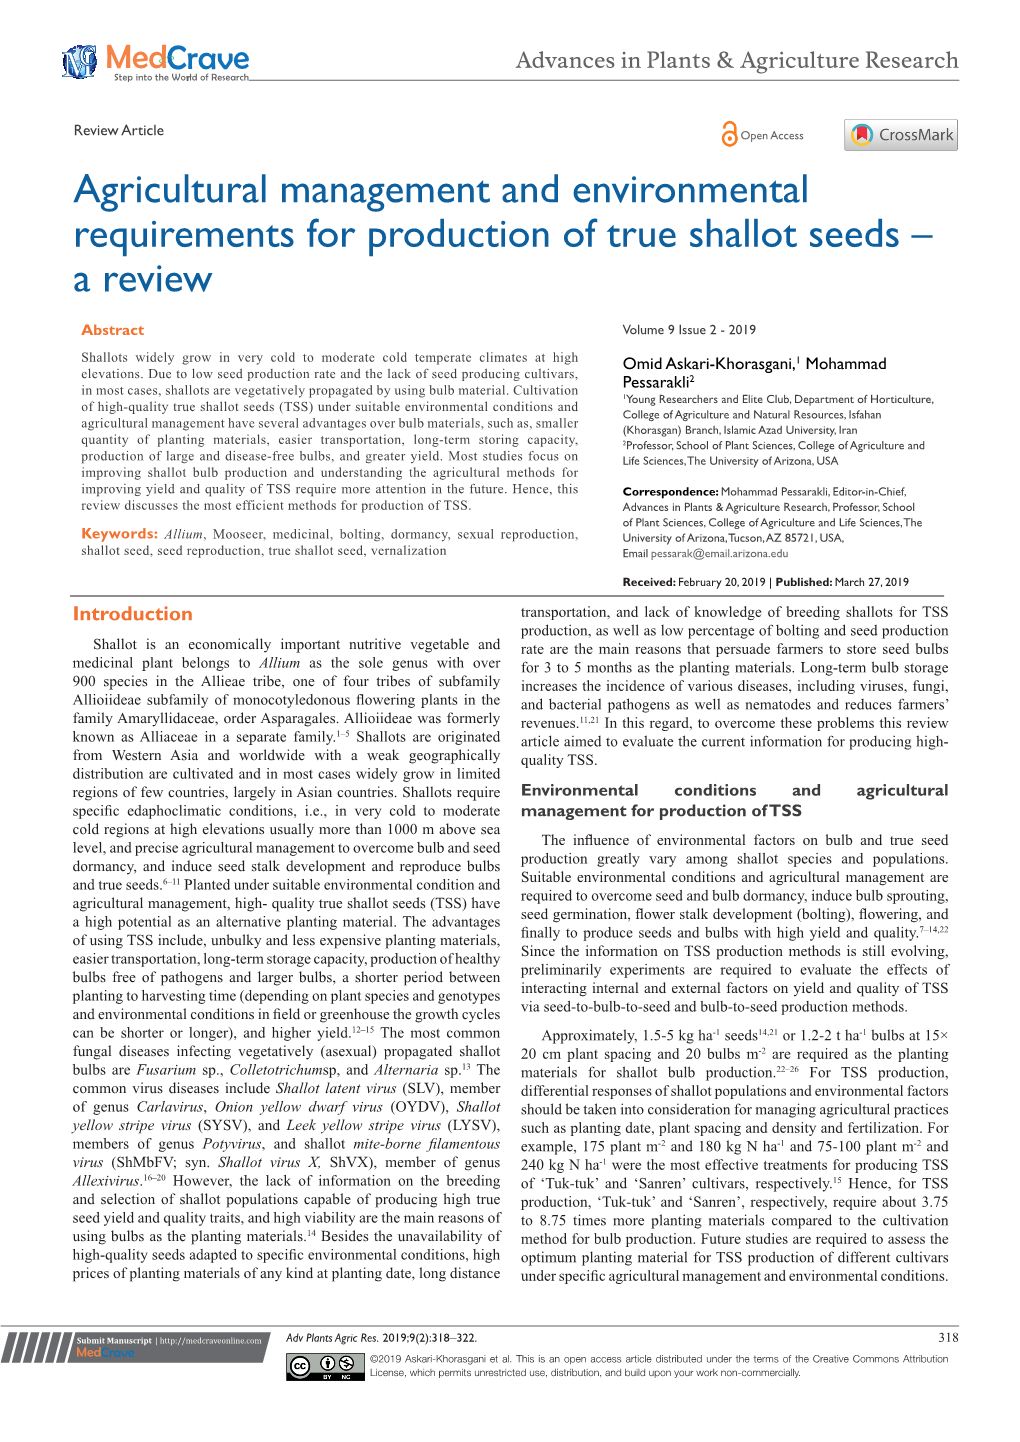 Agricultural Management and Environmental Requirements for Production of True Shallot Seeds – a Review